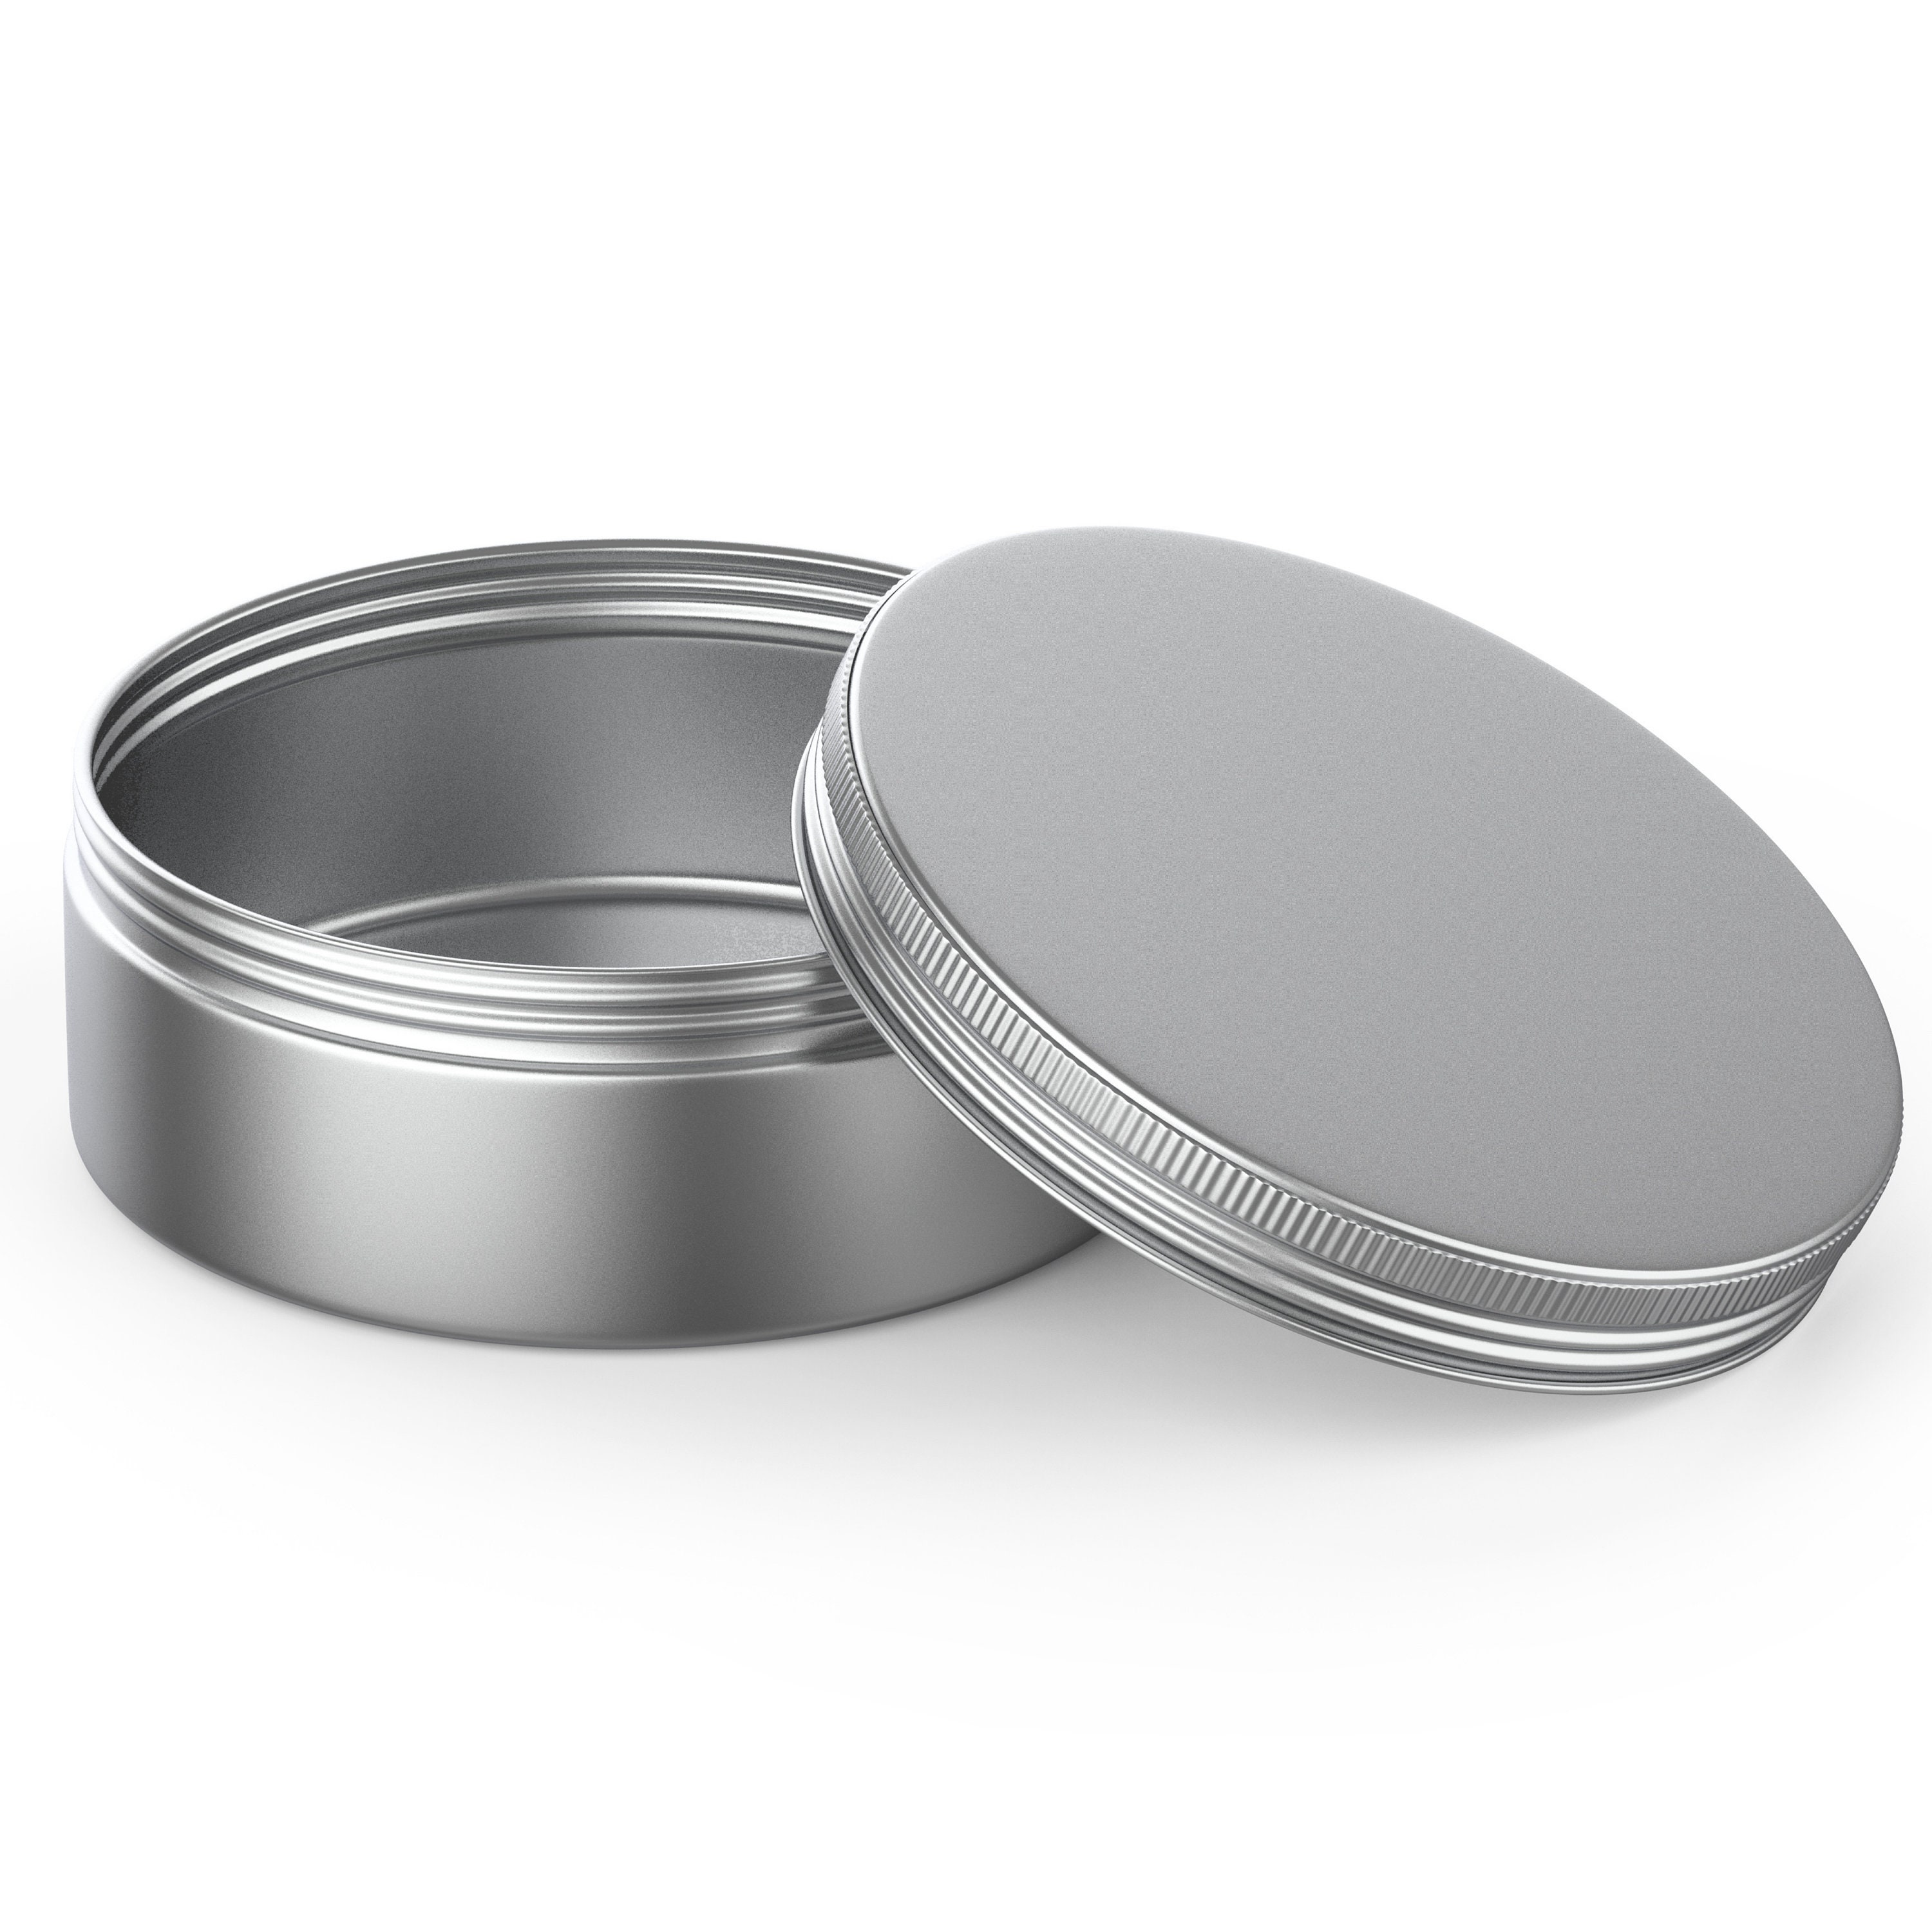 Empty Metal Tins With Lids, 4 Oz Tins Sets of 10 or 48, Round Tins, Small  Metal Tins, Empty Candle Favor Spicetins -  Hong Kong